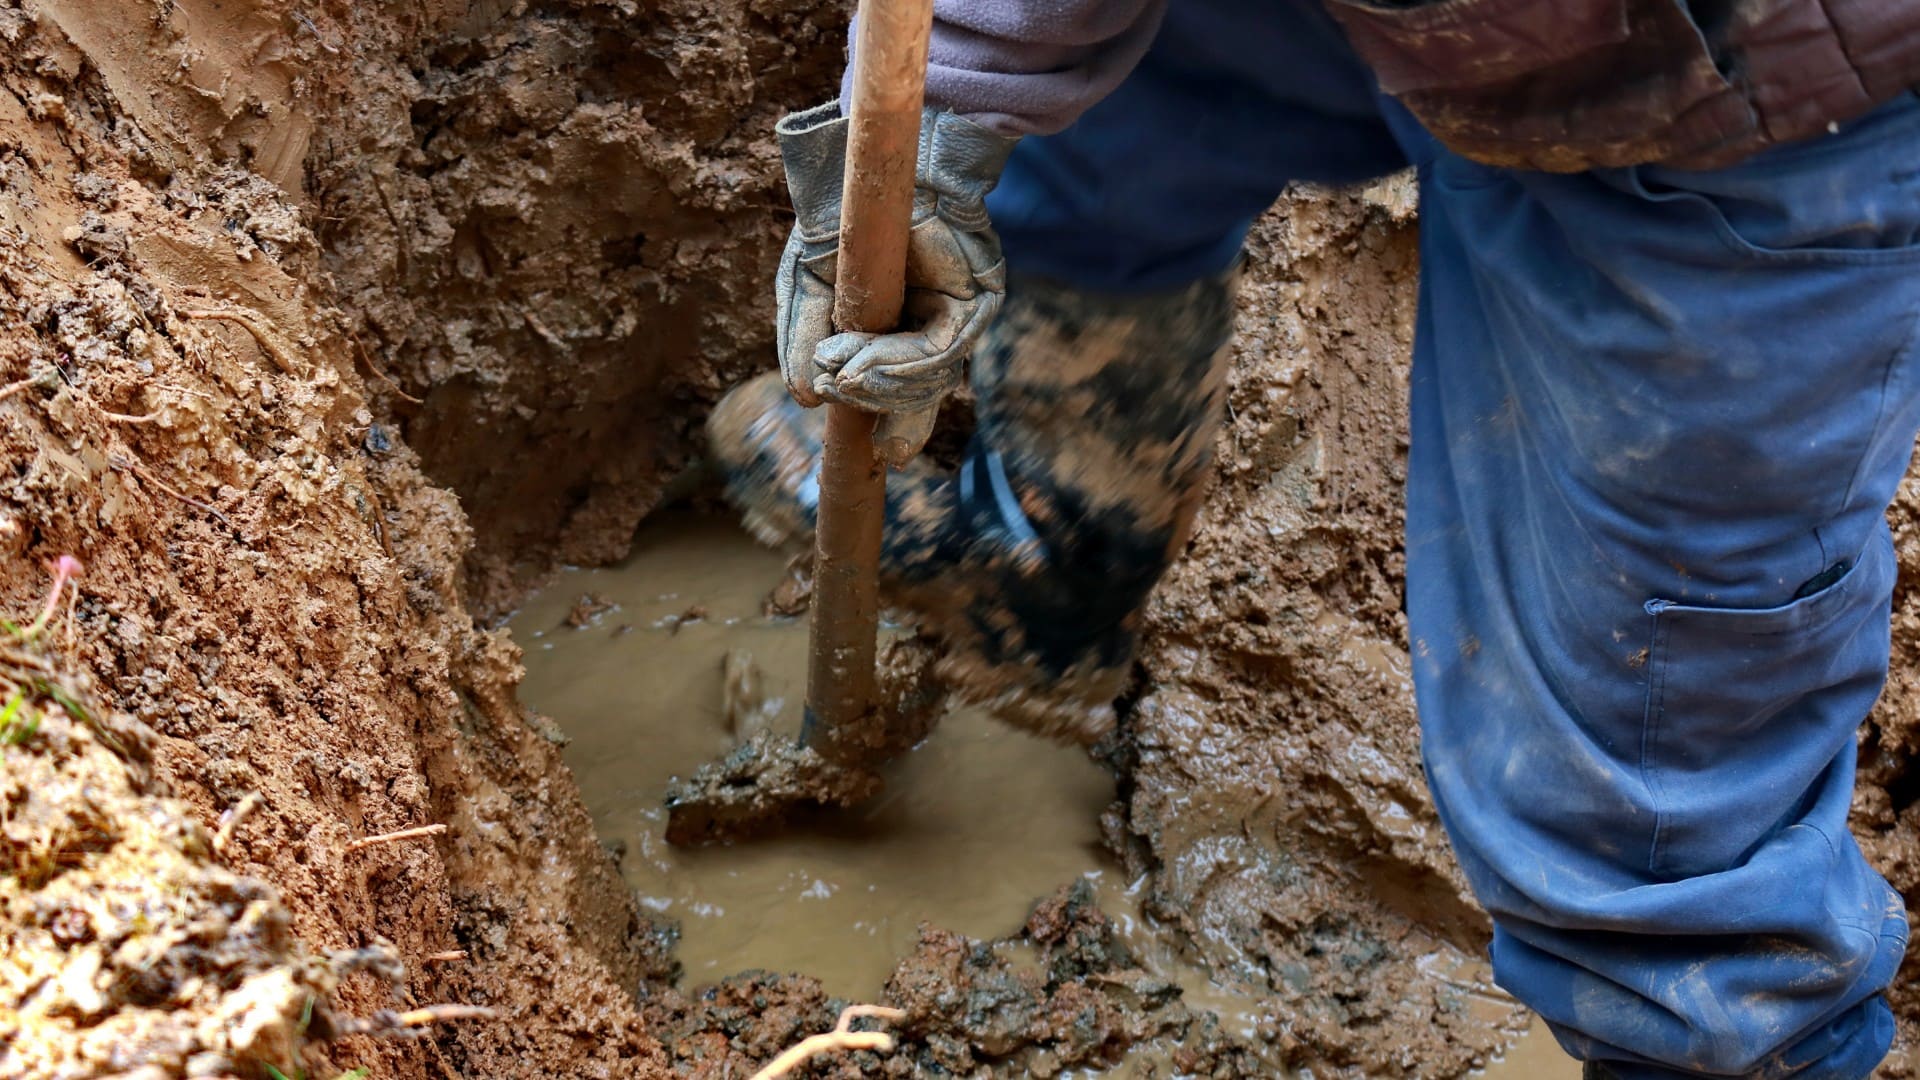 a person digs through mud with a shovel